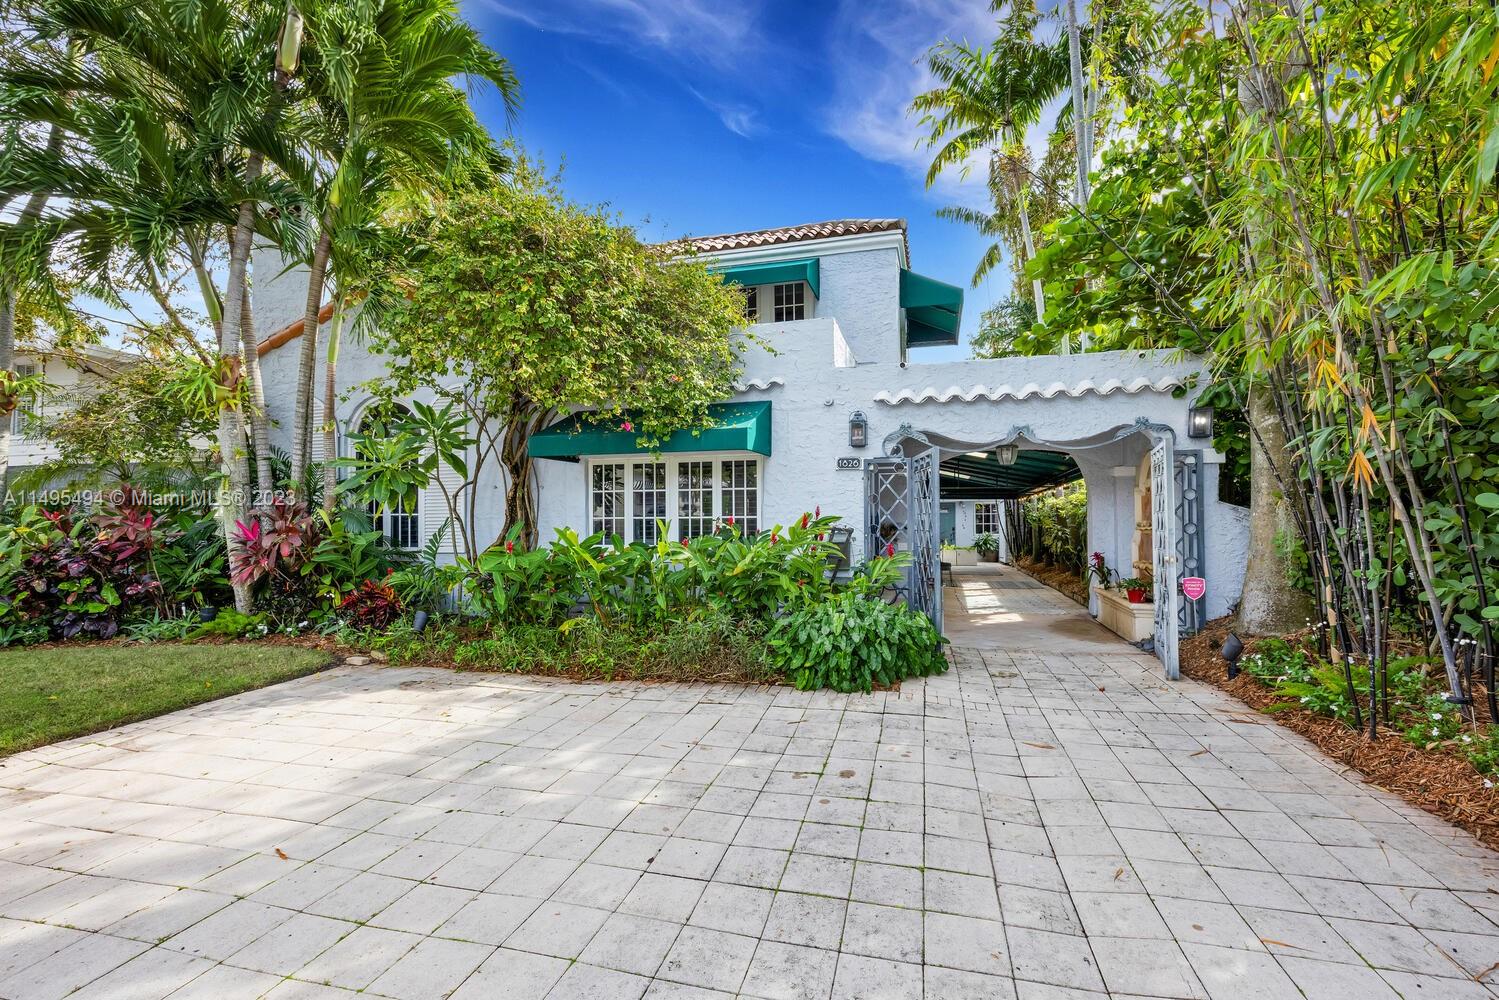 Captivating home on quiet street in prestigious North Coconut Grove. Walk or bike to Biscayne Bay, Kennedy Park and Grove village center. Generous, light-filled living spaces feature classic architectural details, high ceilings, original fireplace, Italian travertine & oak flooring throughout. Updates include eat-in kitchen w/wood cabinetry, quartz countertops & Viking & JennAir appliances + PVC plumbing + full storm protection. Expansive family room features wood beamed ceilings & French doors overlooking the lushly landscaped, private Chicago Brick courtyard with room for pool. Main house 3BR/2BA + detached 1BR/1.5 BA guest house w/living room & full kitchen. Neighborhood security patrol. Parking for 5 cars & wired with EV charger. Minutes to downtown MIA, Key Biscayne & Beaches.